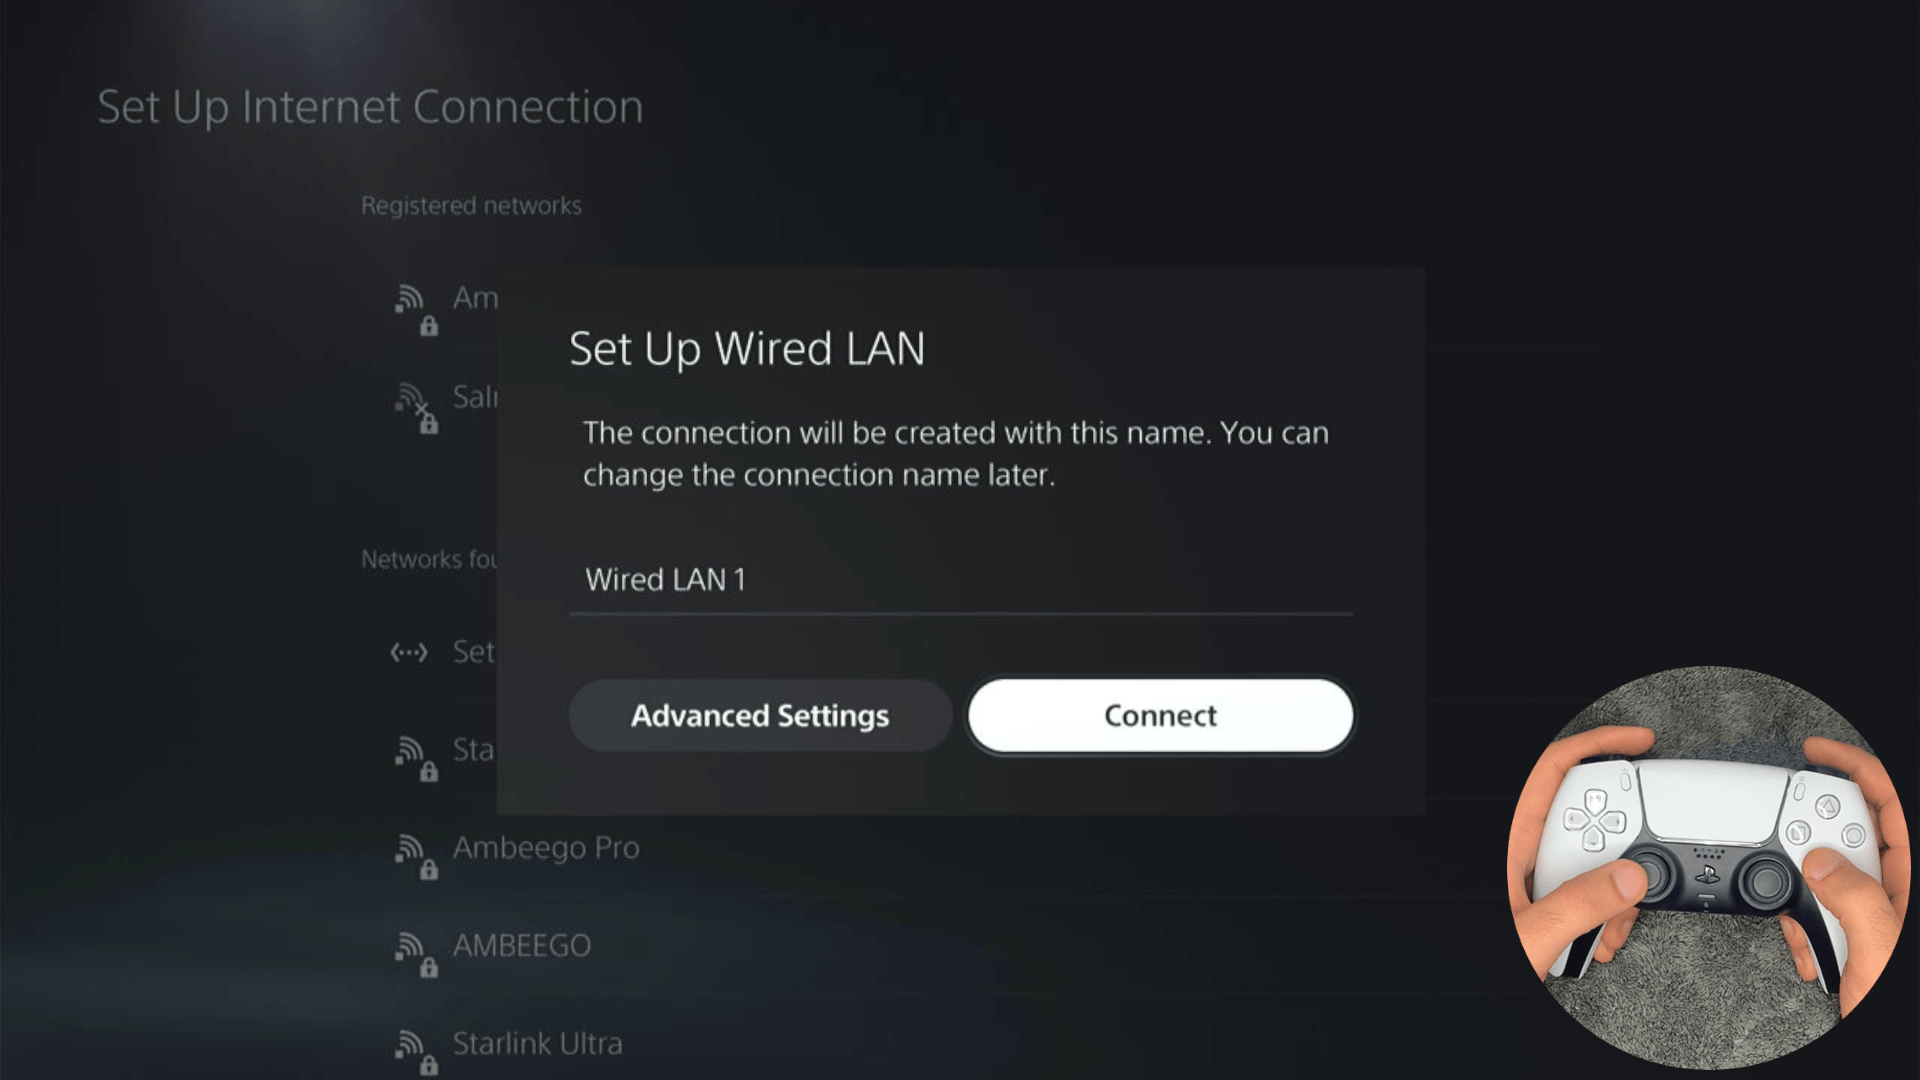 New dialog to rename your connection and then proceed to Connect to it.